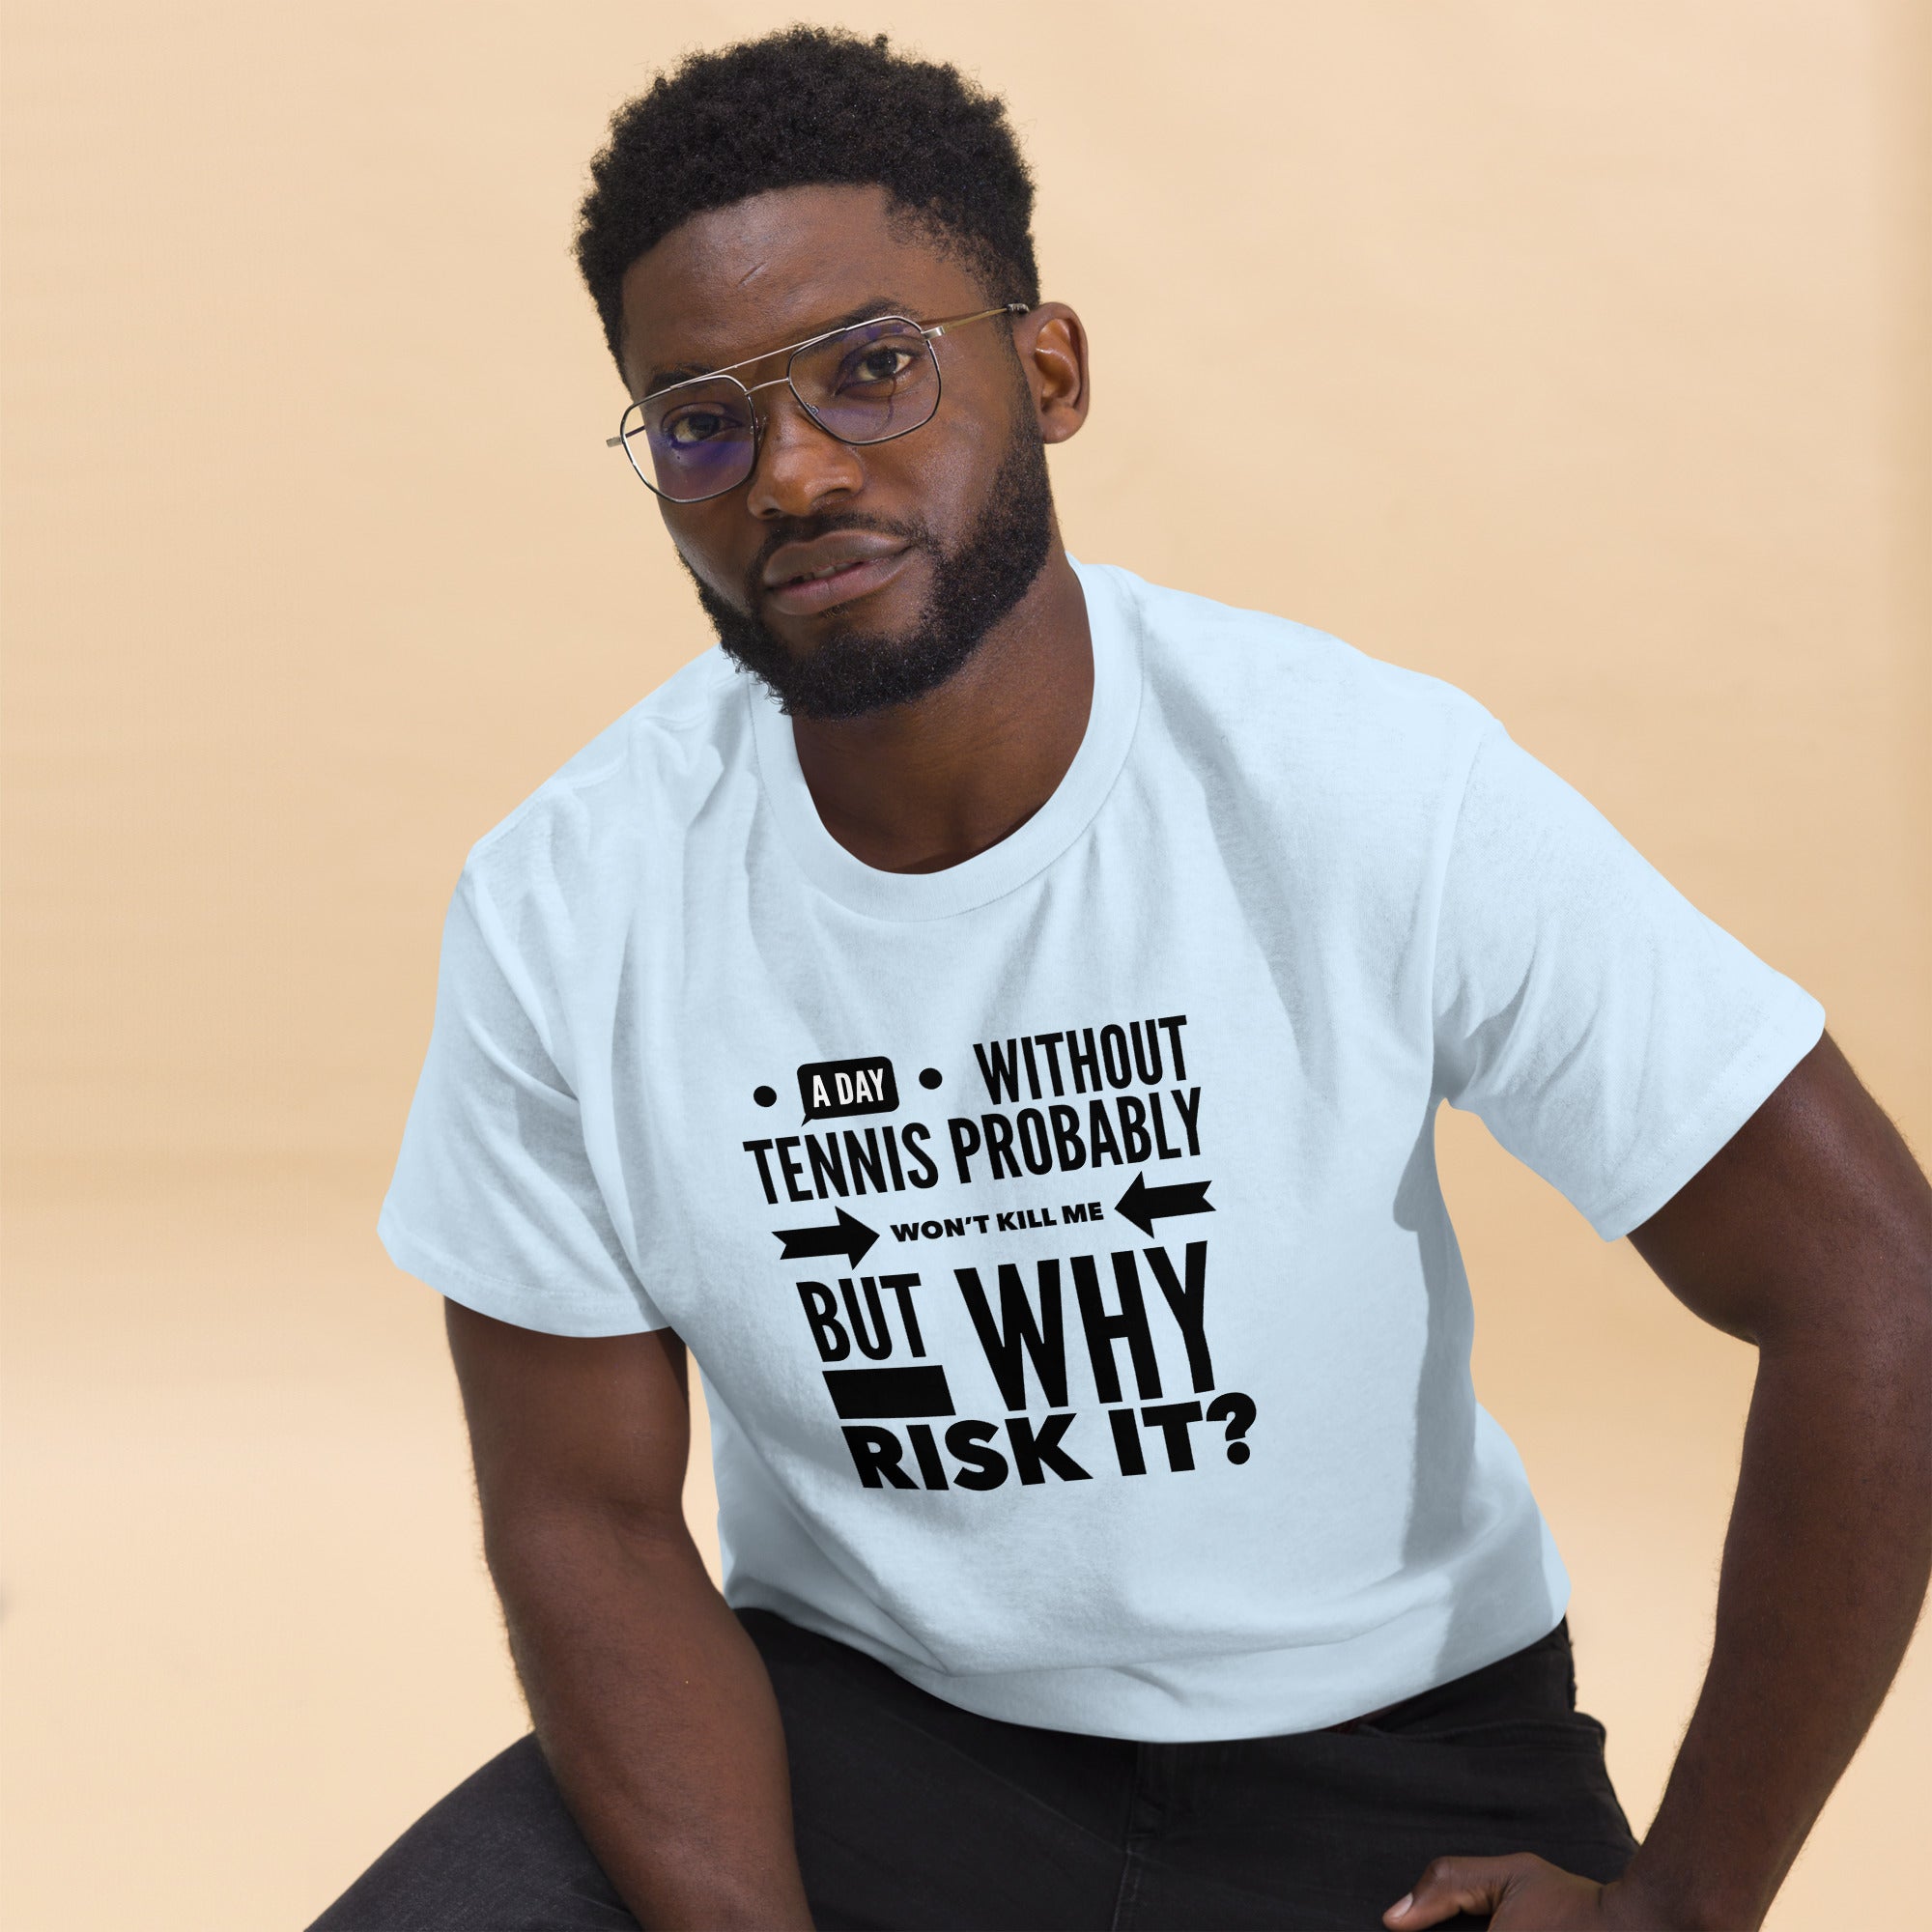 Why Risk It -- Men's classic tee